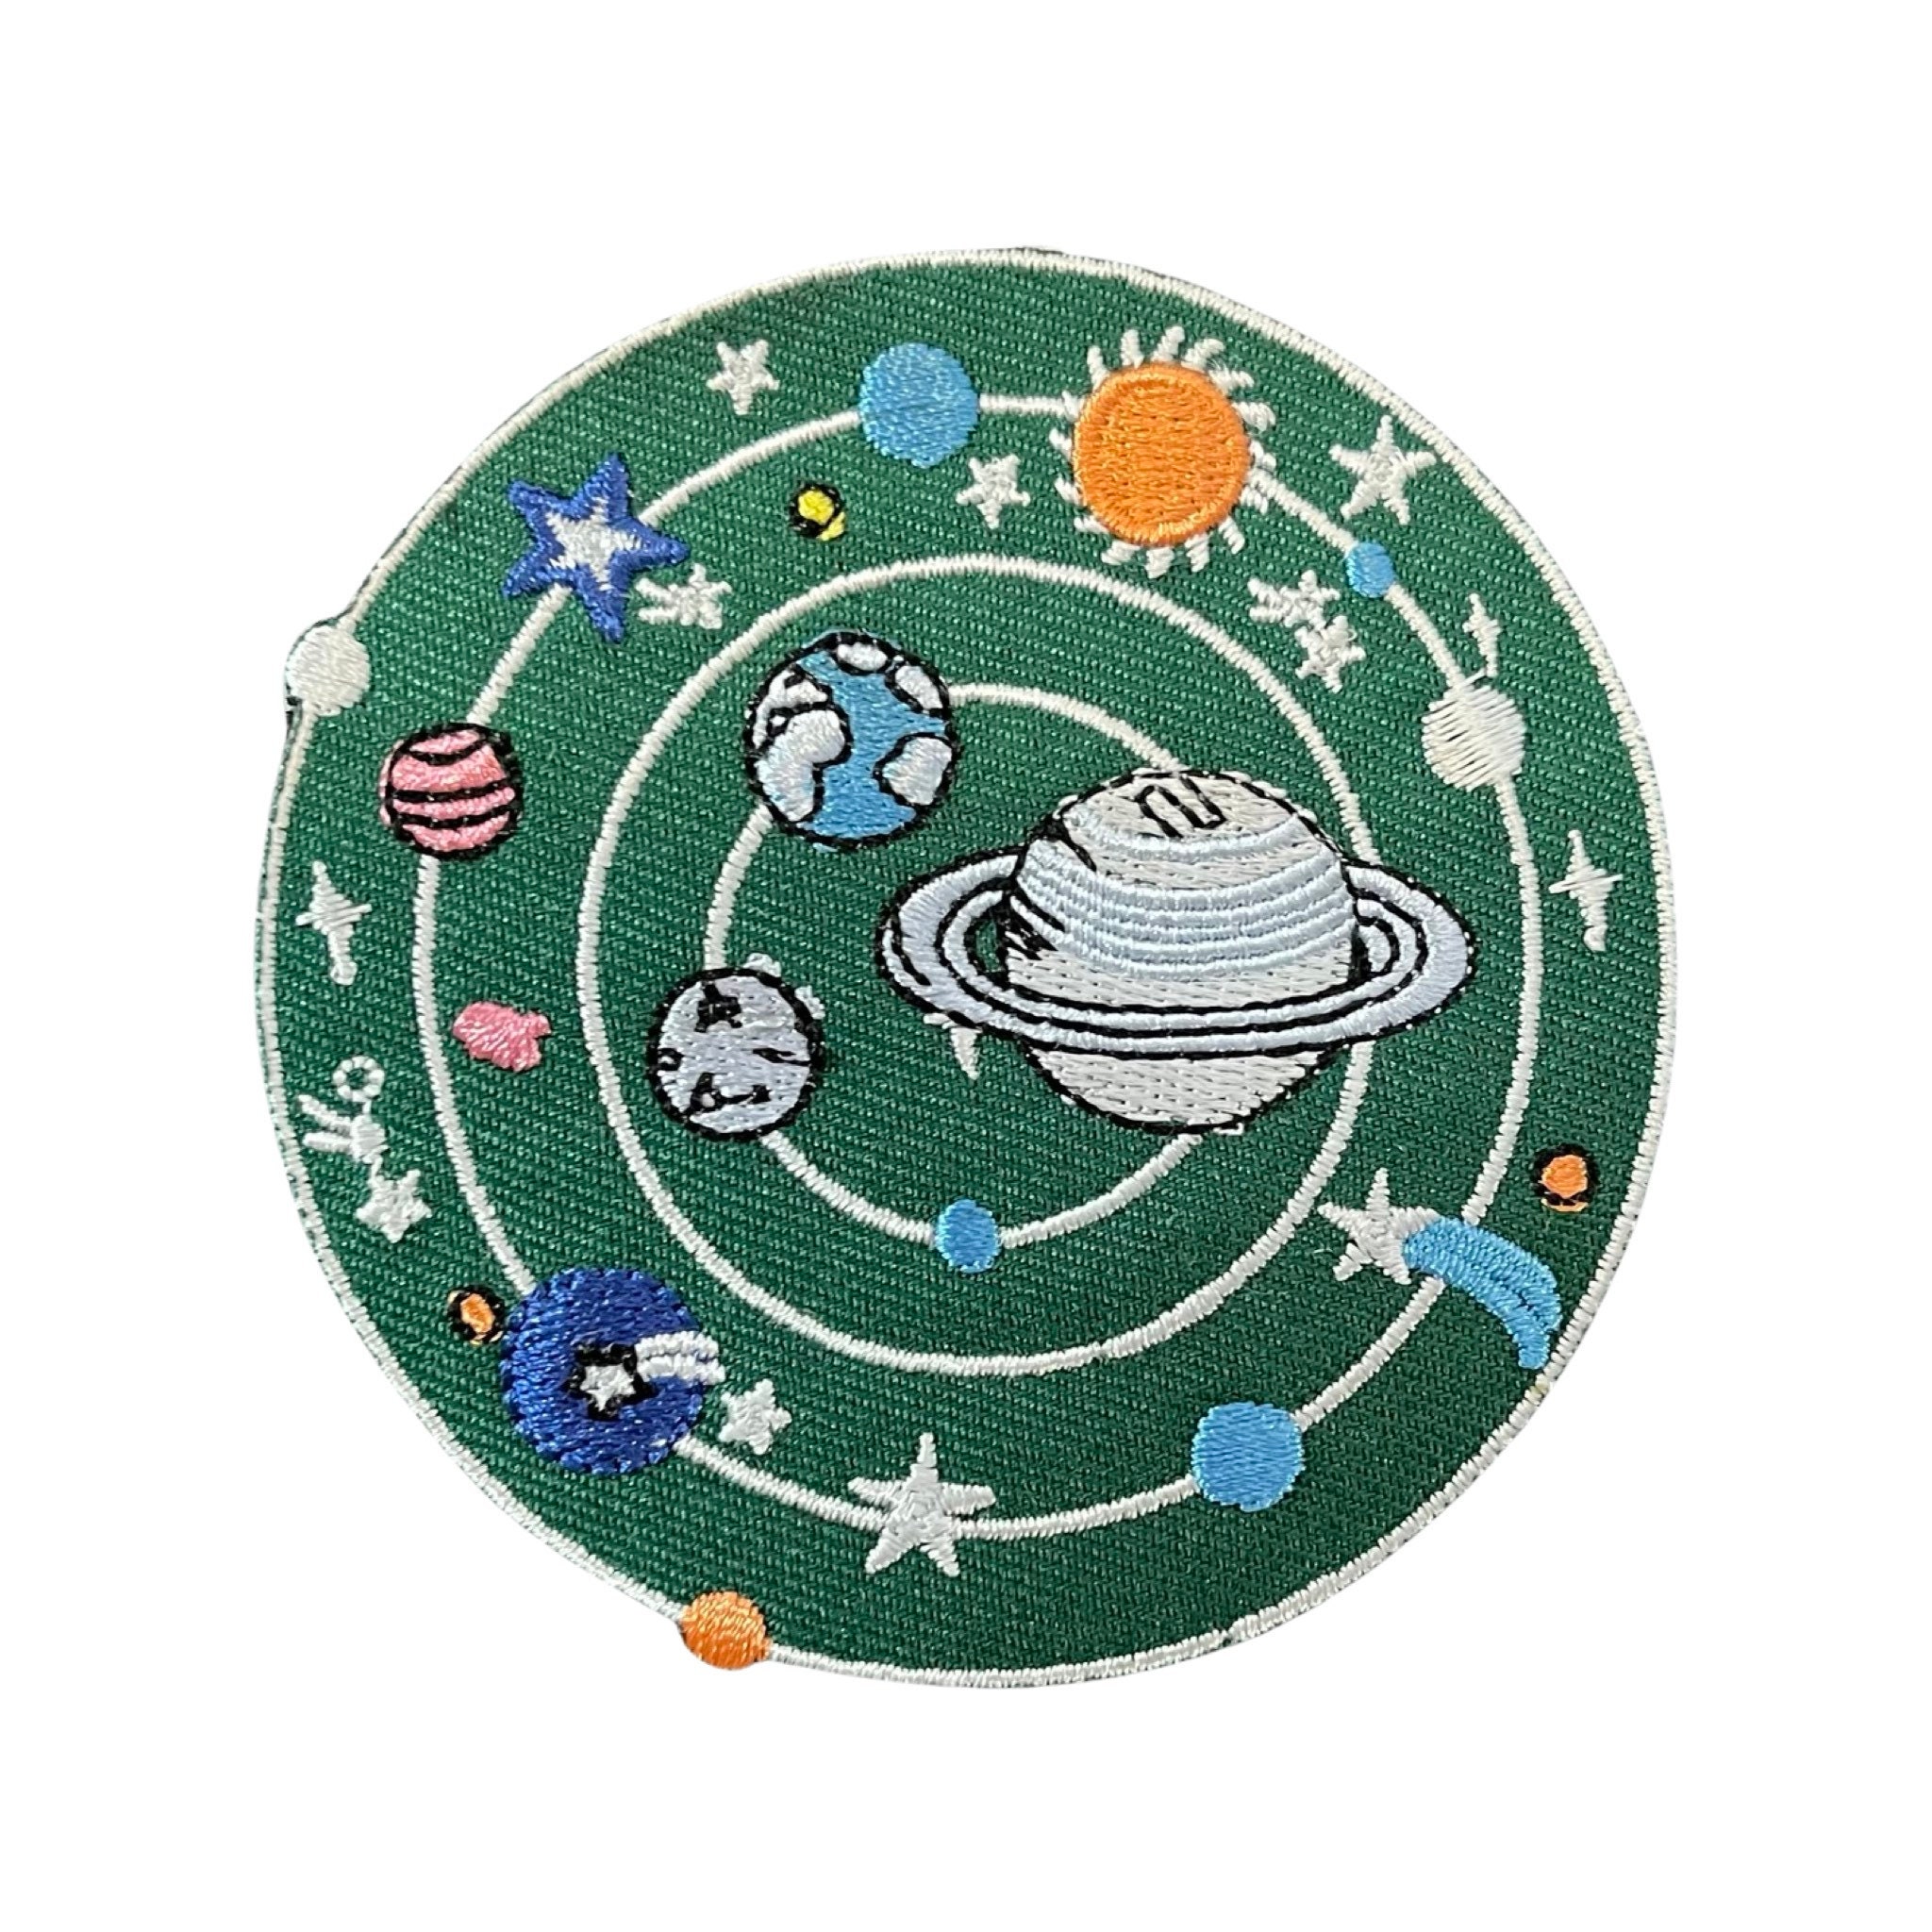  Woohome 12 PCS Iron On Denim Patches Solar System